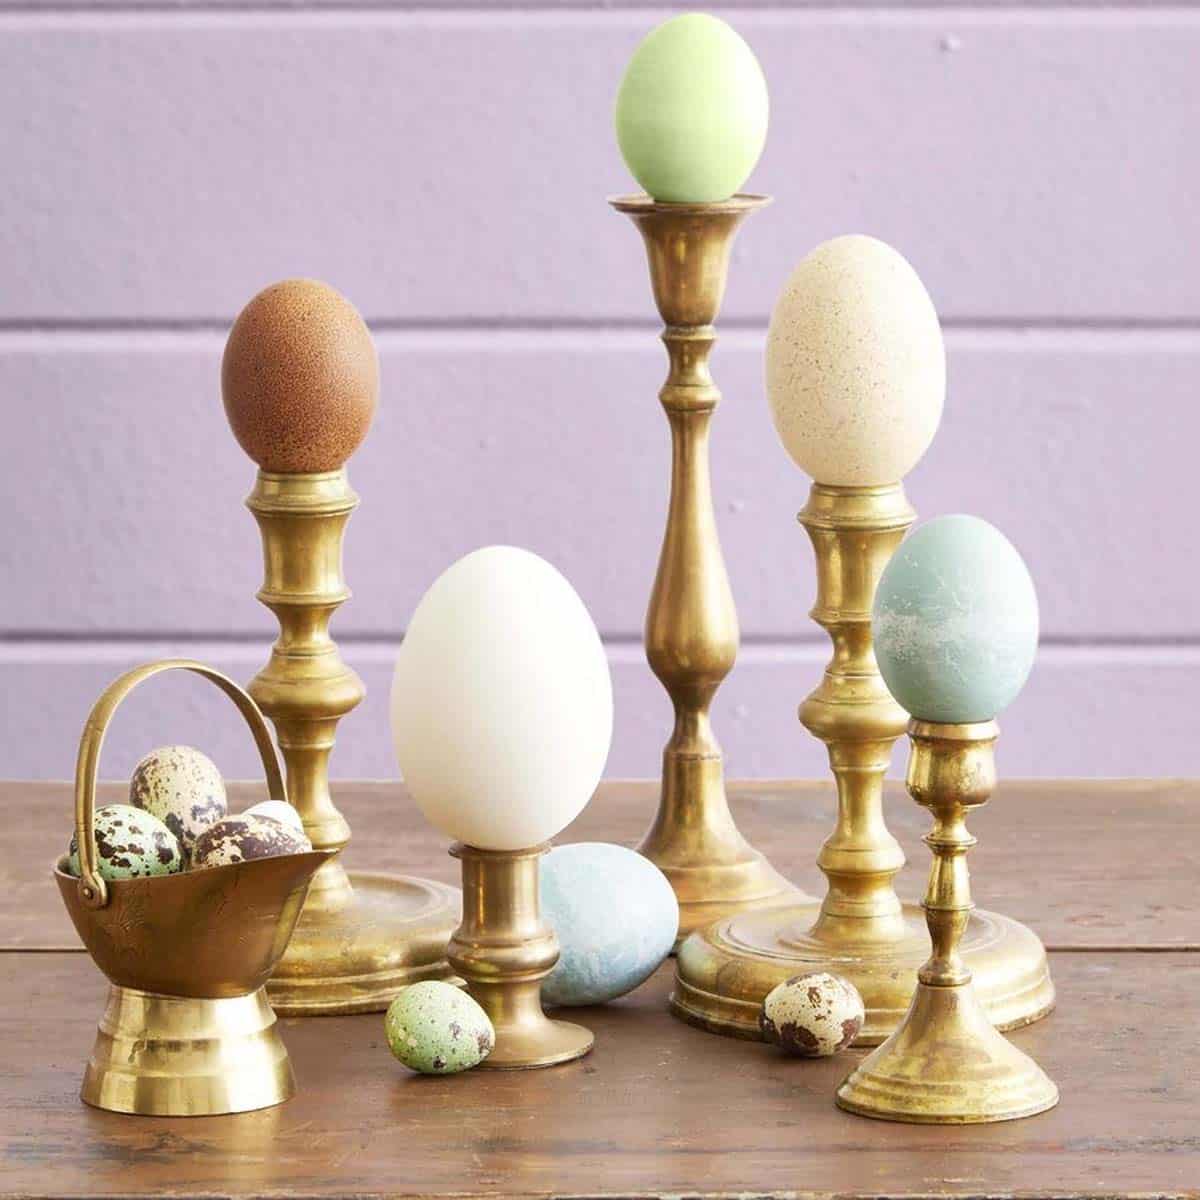 Candlesticks with eggs for Easter decor